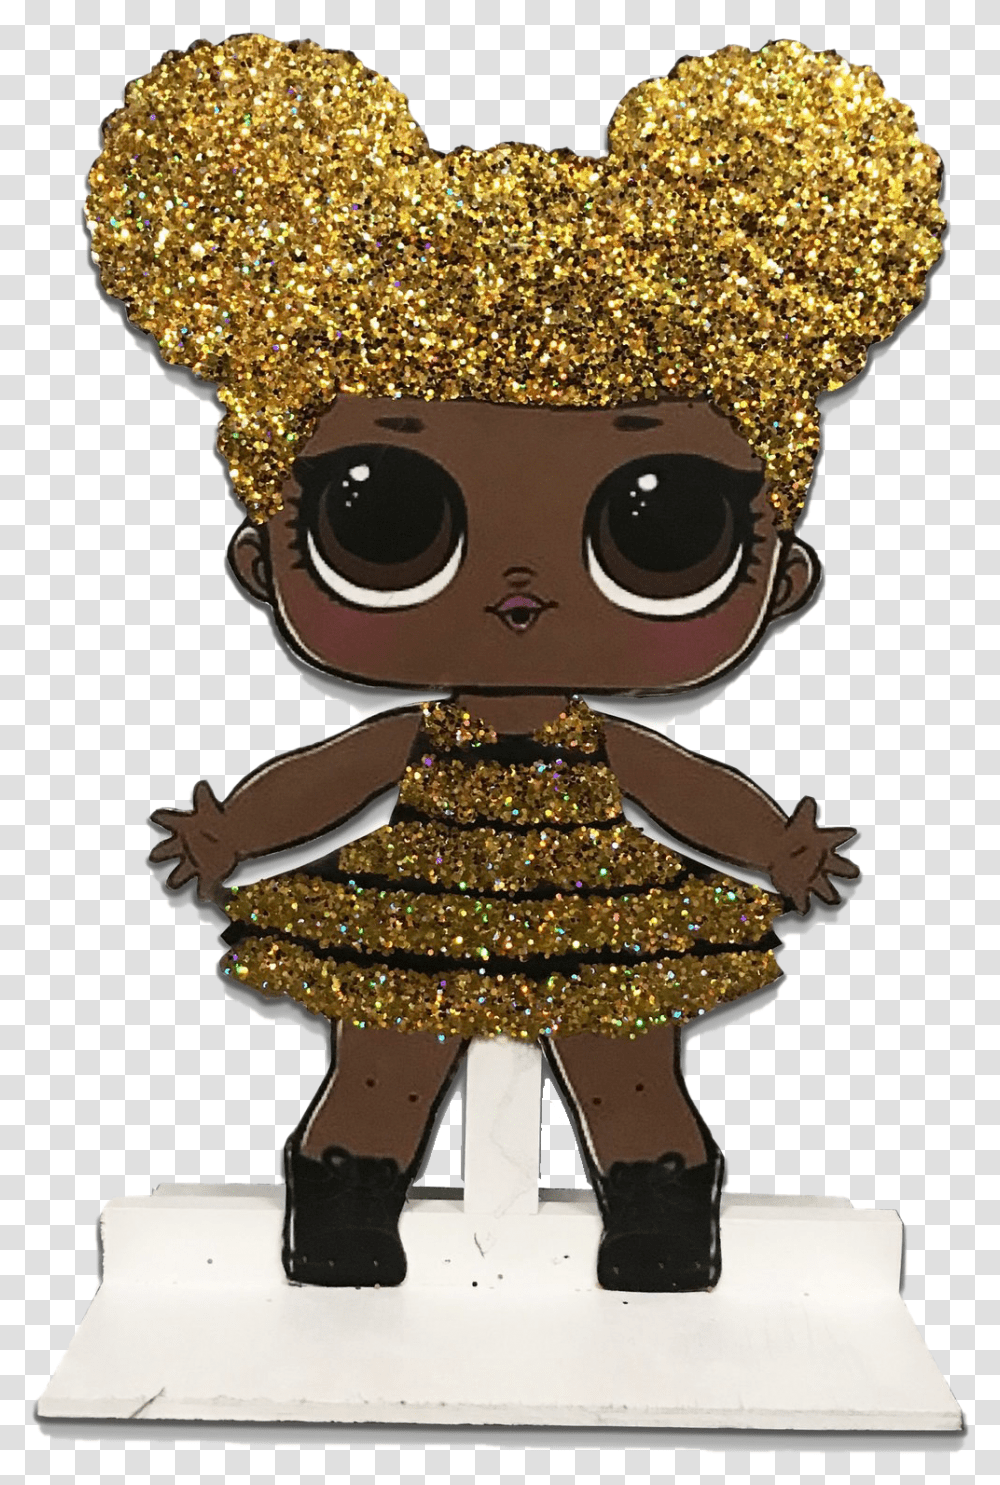 Lol Doll Image File Lol Surprise Doll Queen Bee, Toy, Jewelry, Accessories, Accessory Transparent Png